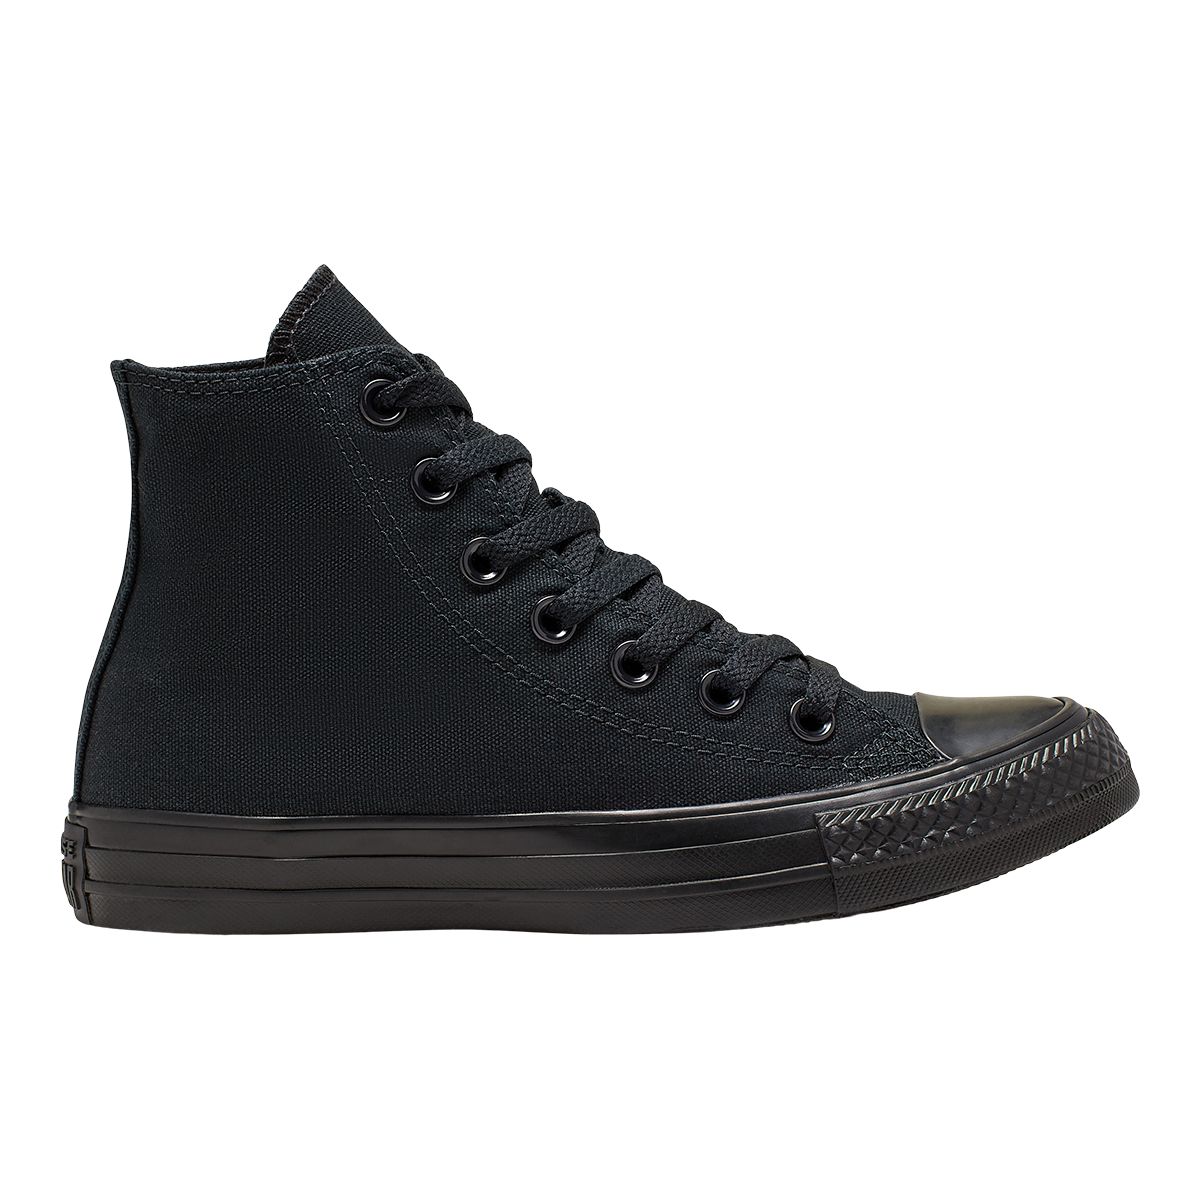 Image of Converse Women's Chuck Taylor High Top Shoes Sneakers